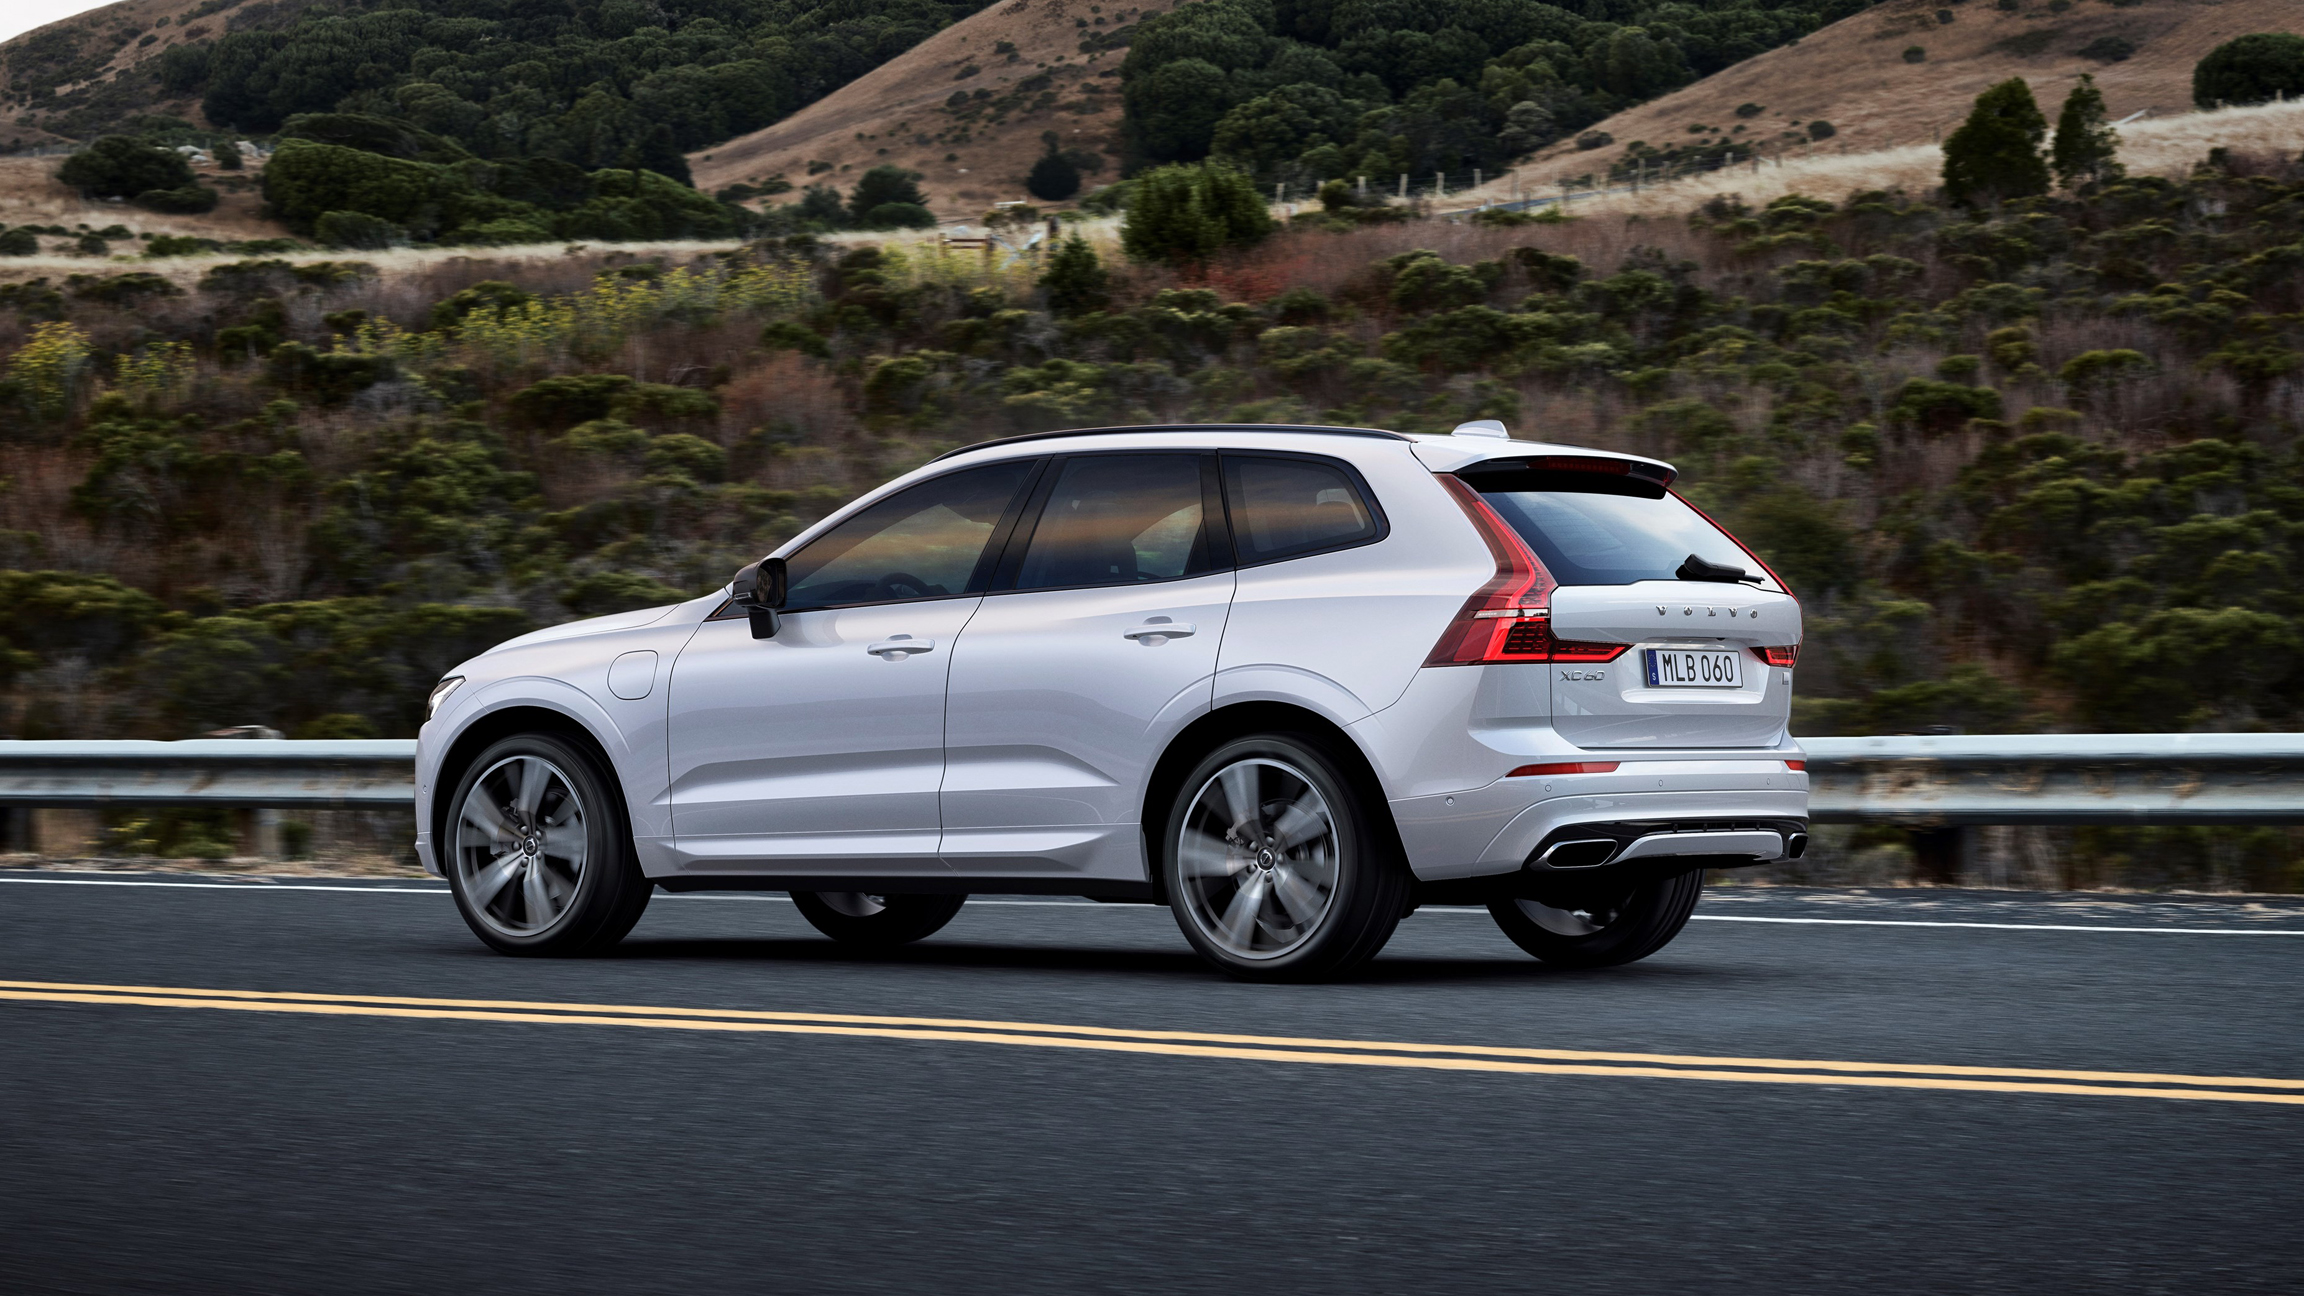 2021 Volvo XC60 Review | Price, specs, features and photos | Autoblog